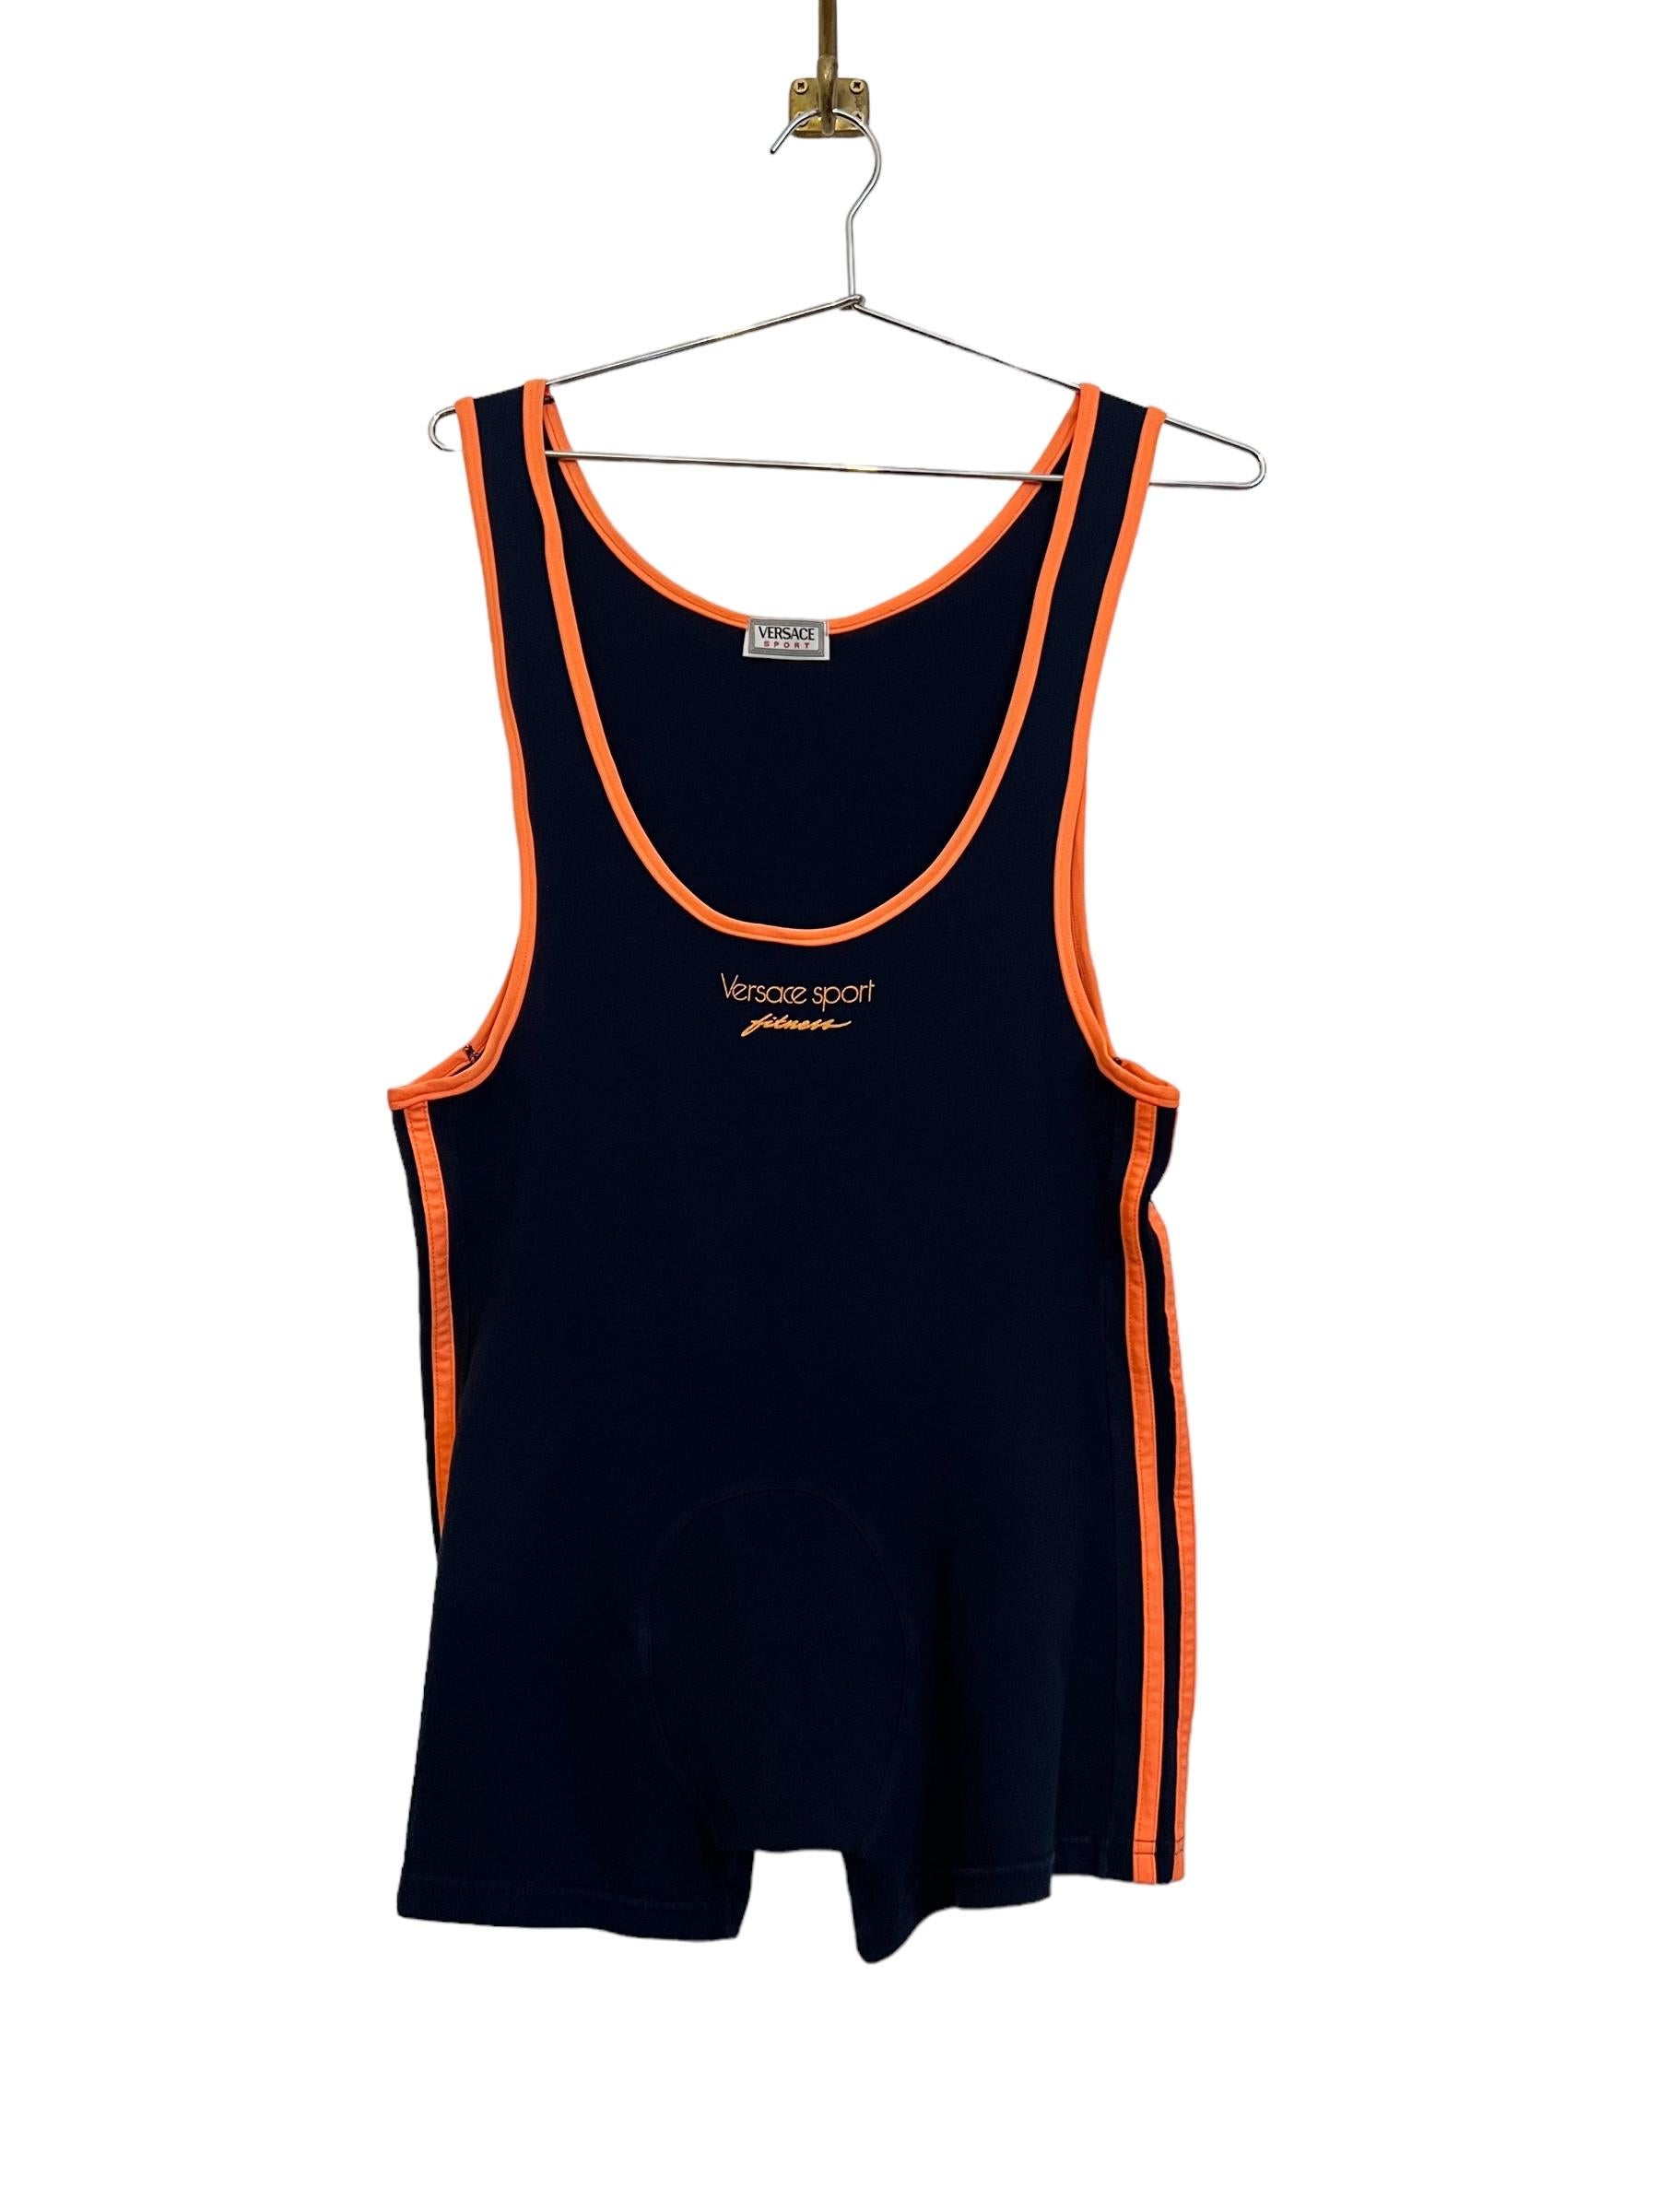 Iconic early 1990's Vintage VERSACE Sport 'Fitness' Sport suit in navy blue with contrasting orange racer striped sides, piping and logo printed details.

Features: 
Deep Muscle fit Scoop Neck
striped sides
Stretchy Material
MADE IN ITALY

Size